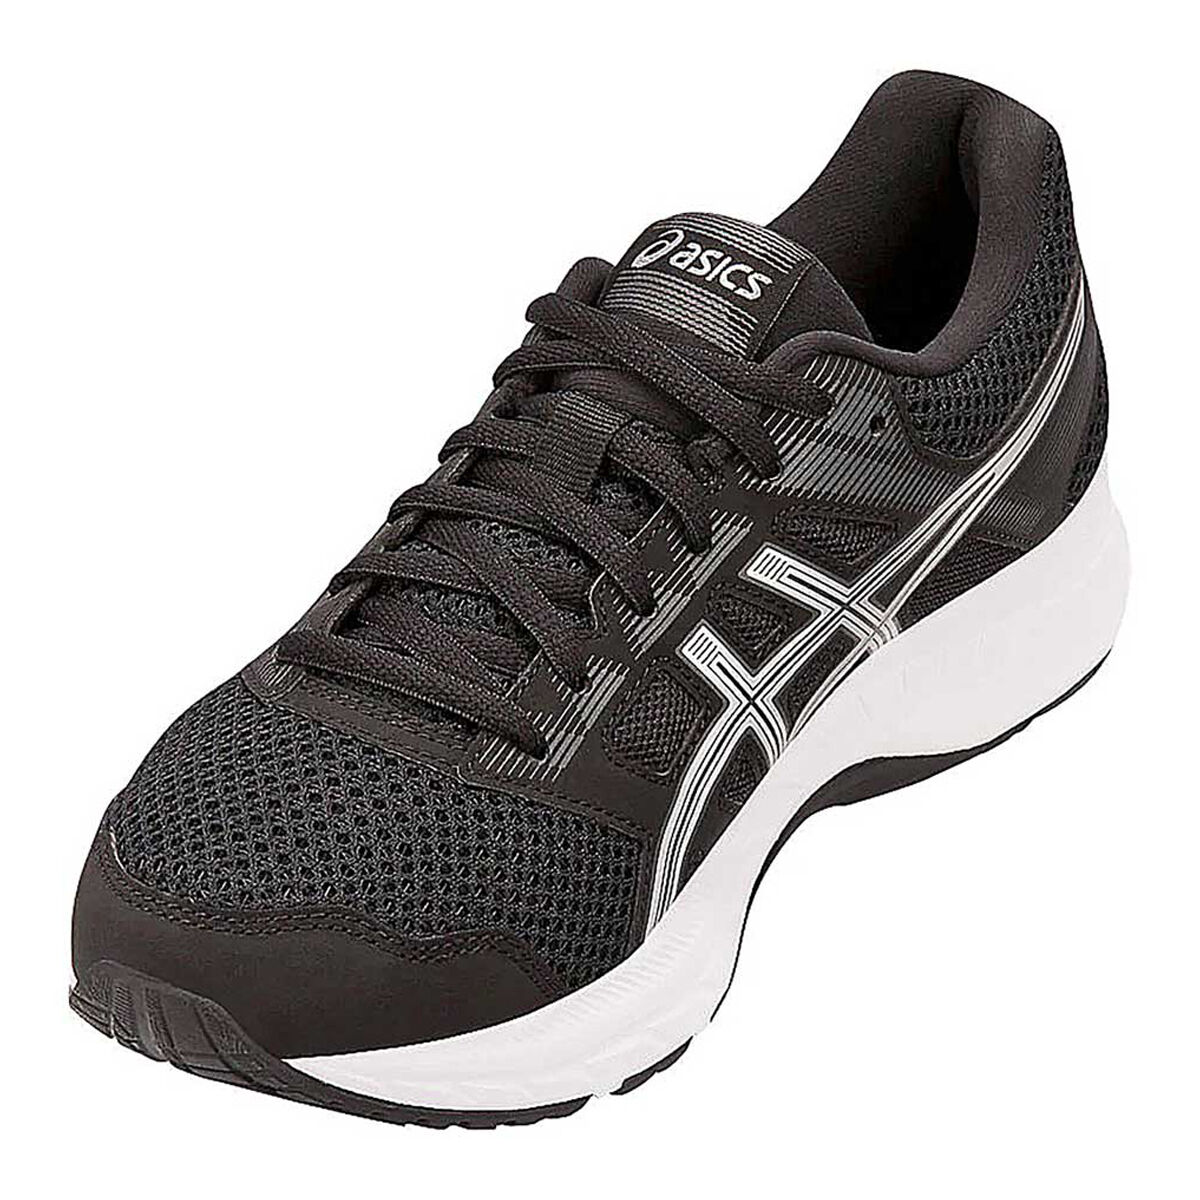 difference between asics gel contend 4 and 5